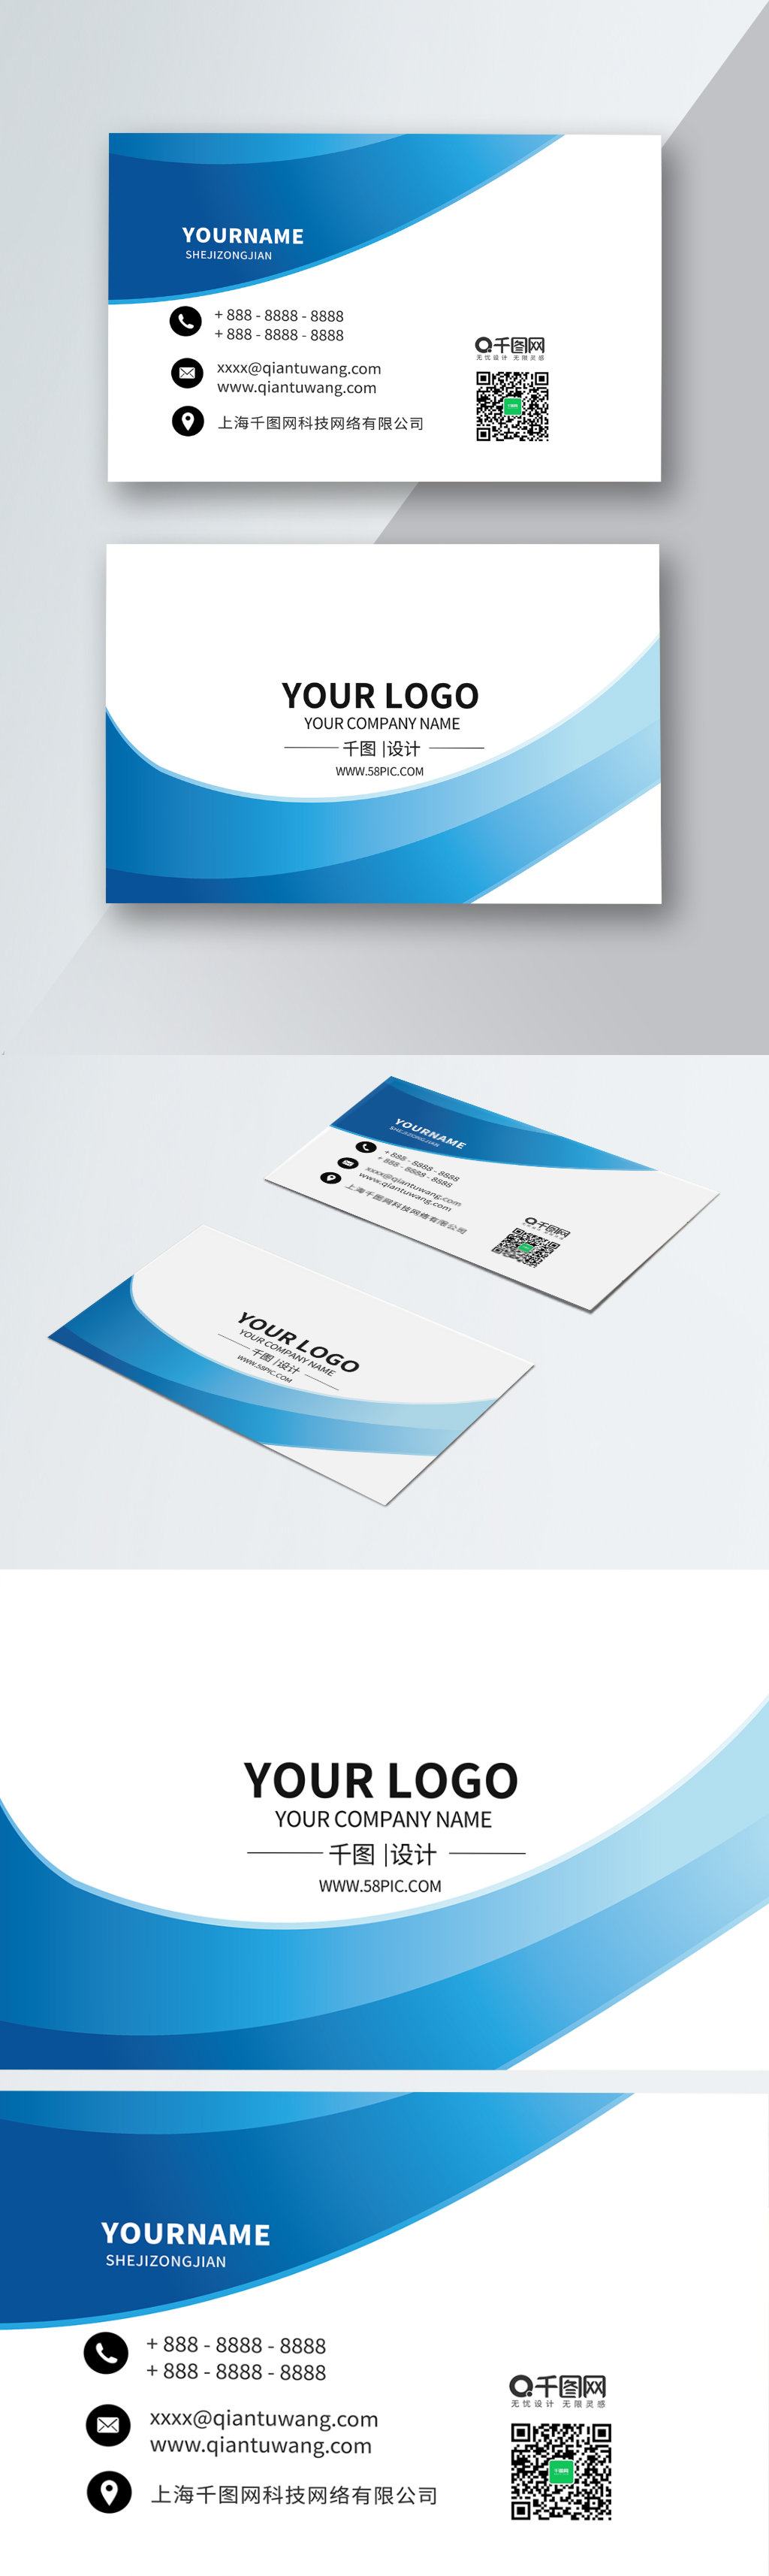 credit-card-business-card-template-cdr-vector-material-template-image